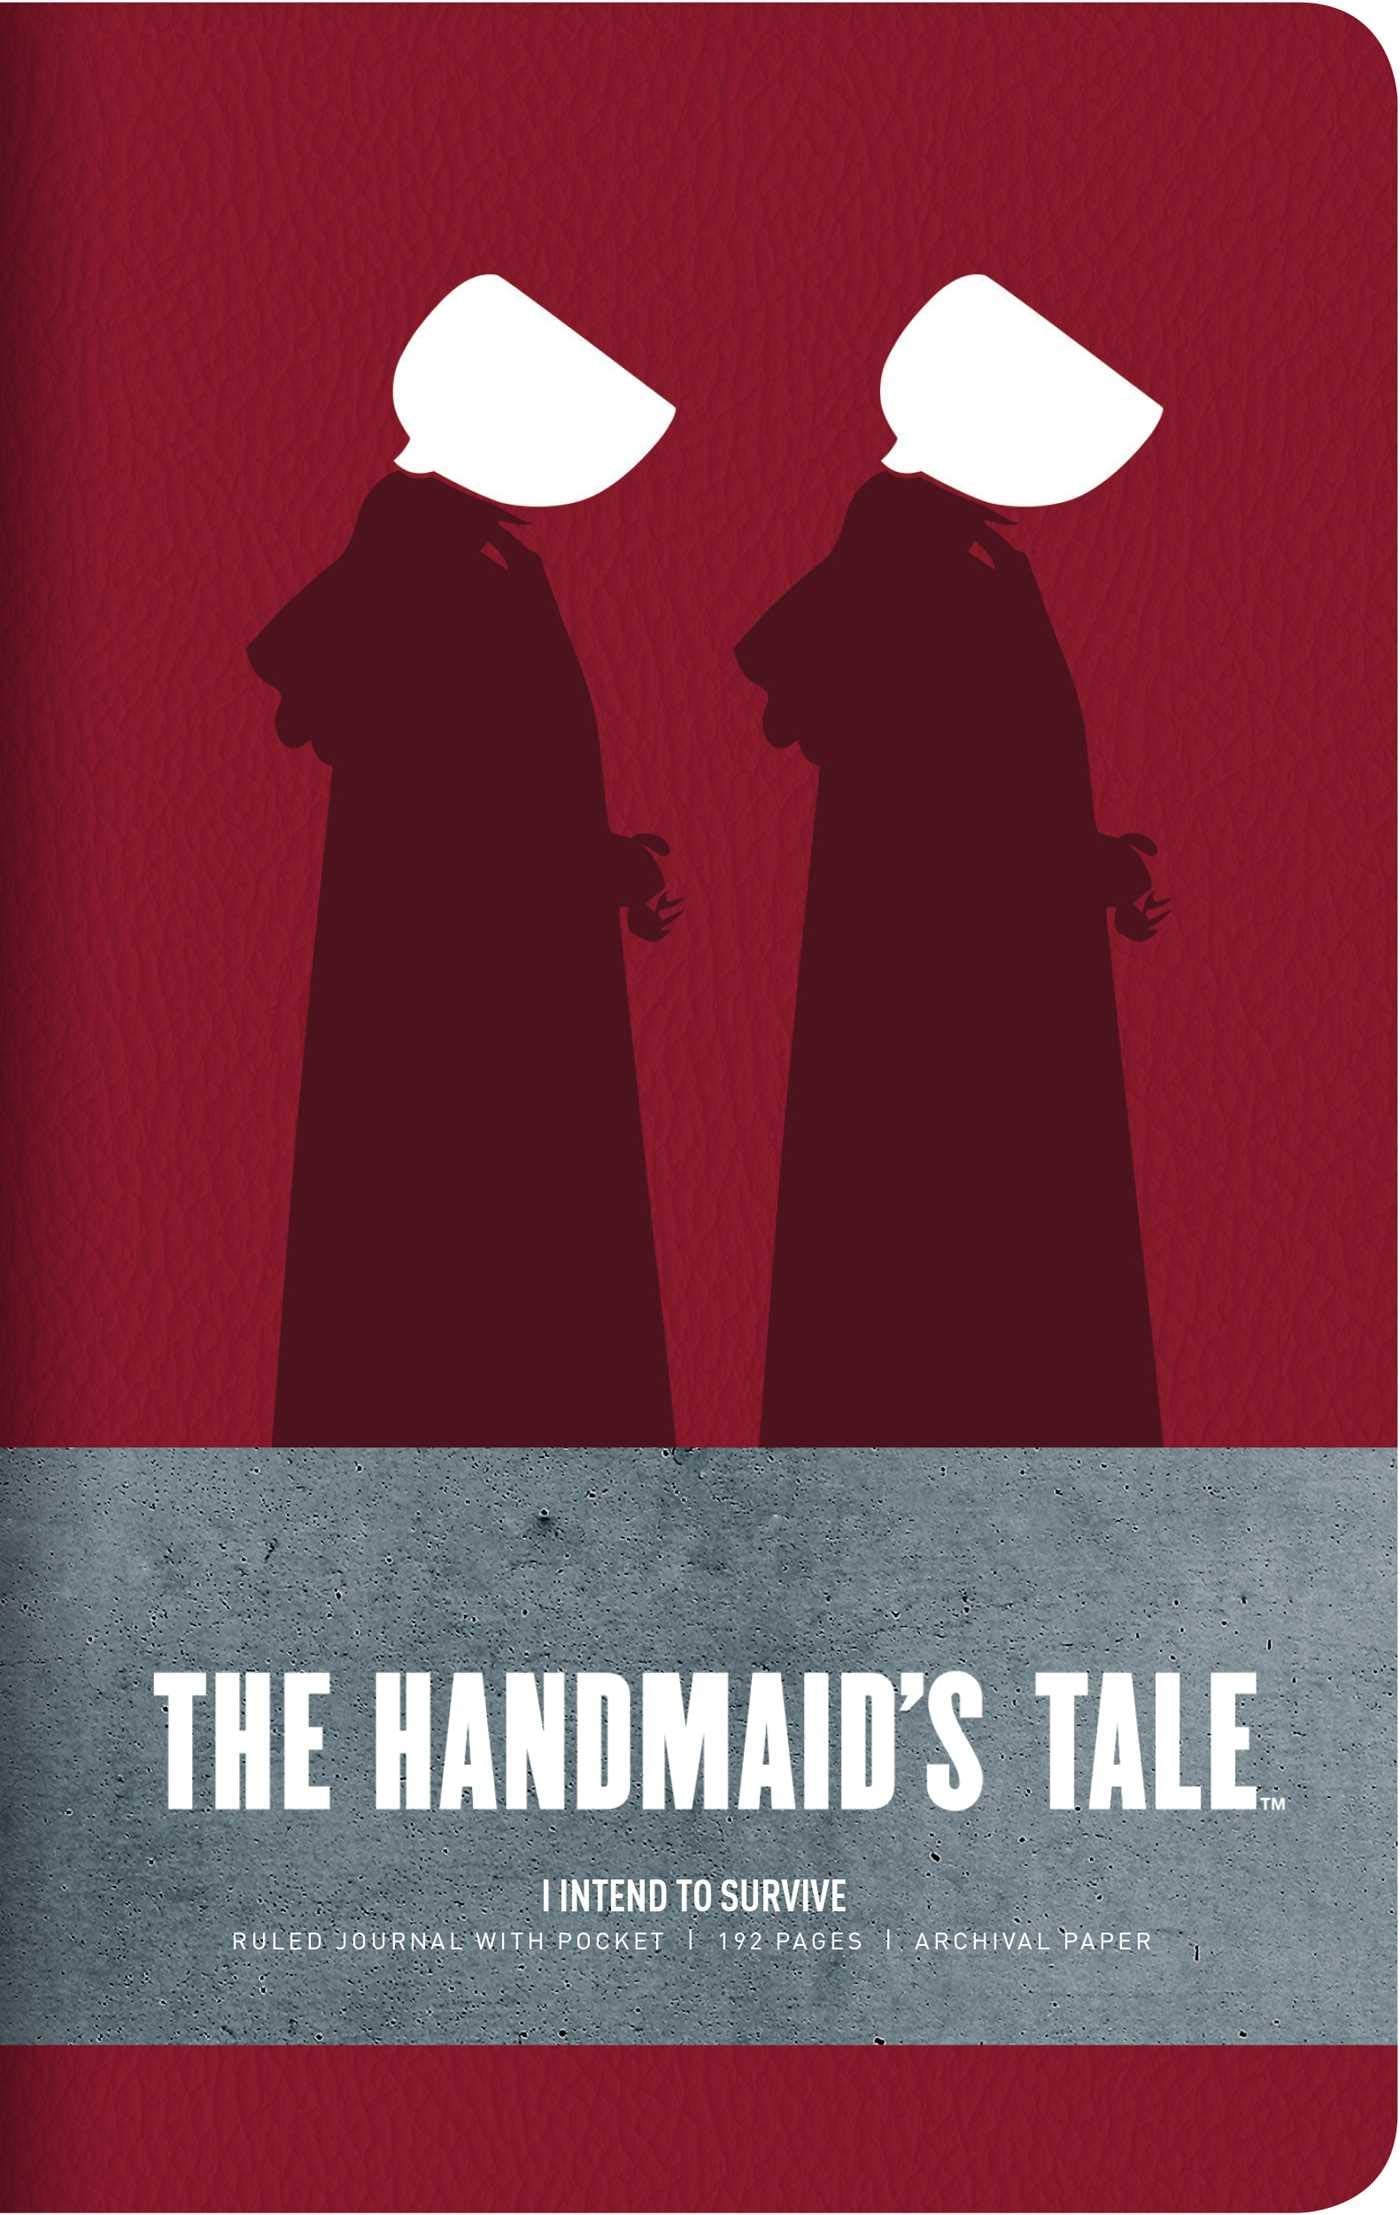 Notebook: I Intend to Survive (The Handmaid's Tale)